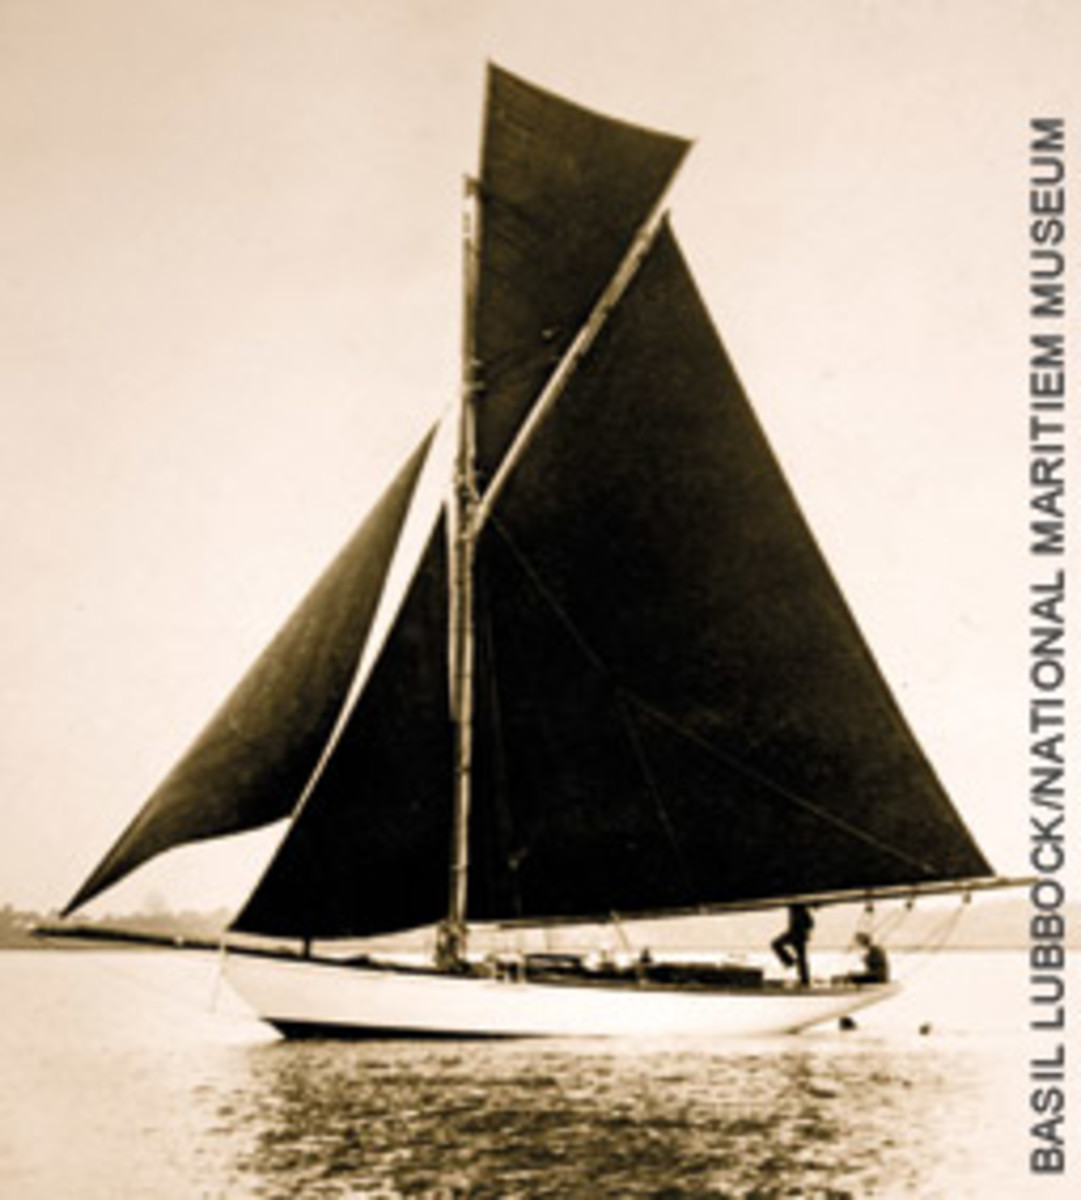 Witch, designed in 1902 by Charles Sibbick, caught the eye of a man who has become a shipwright so he can restore her.